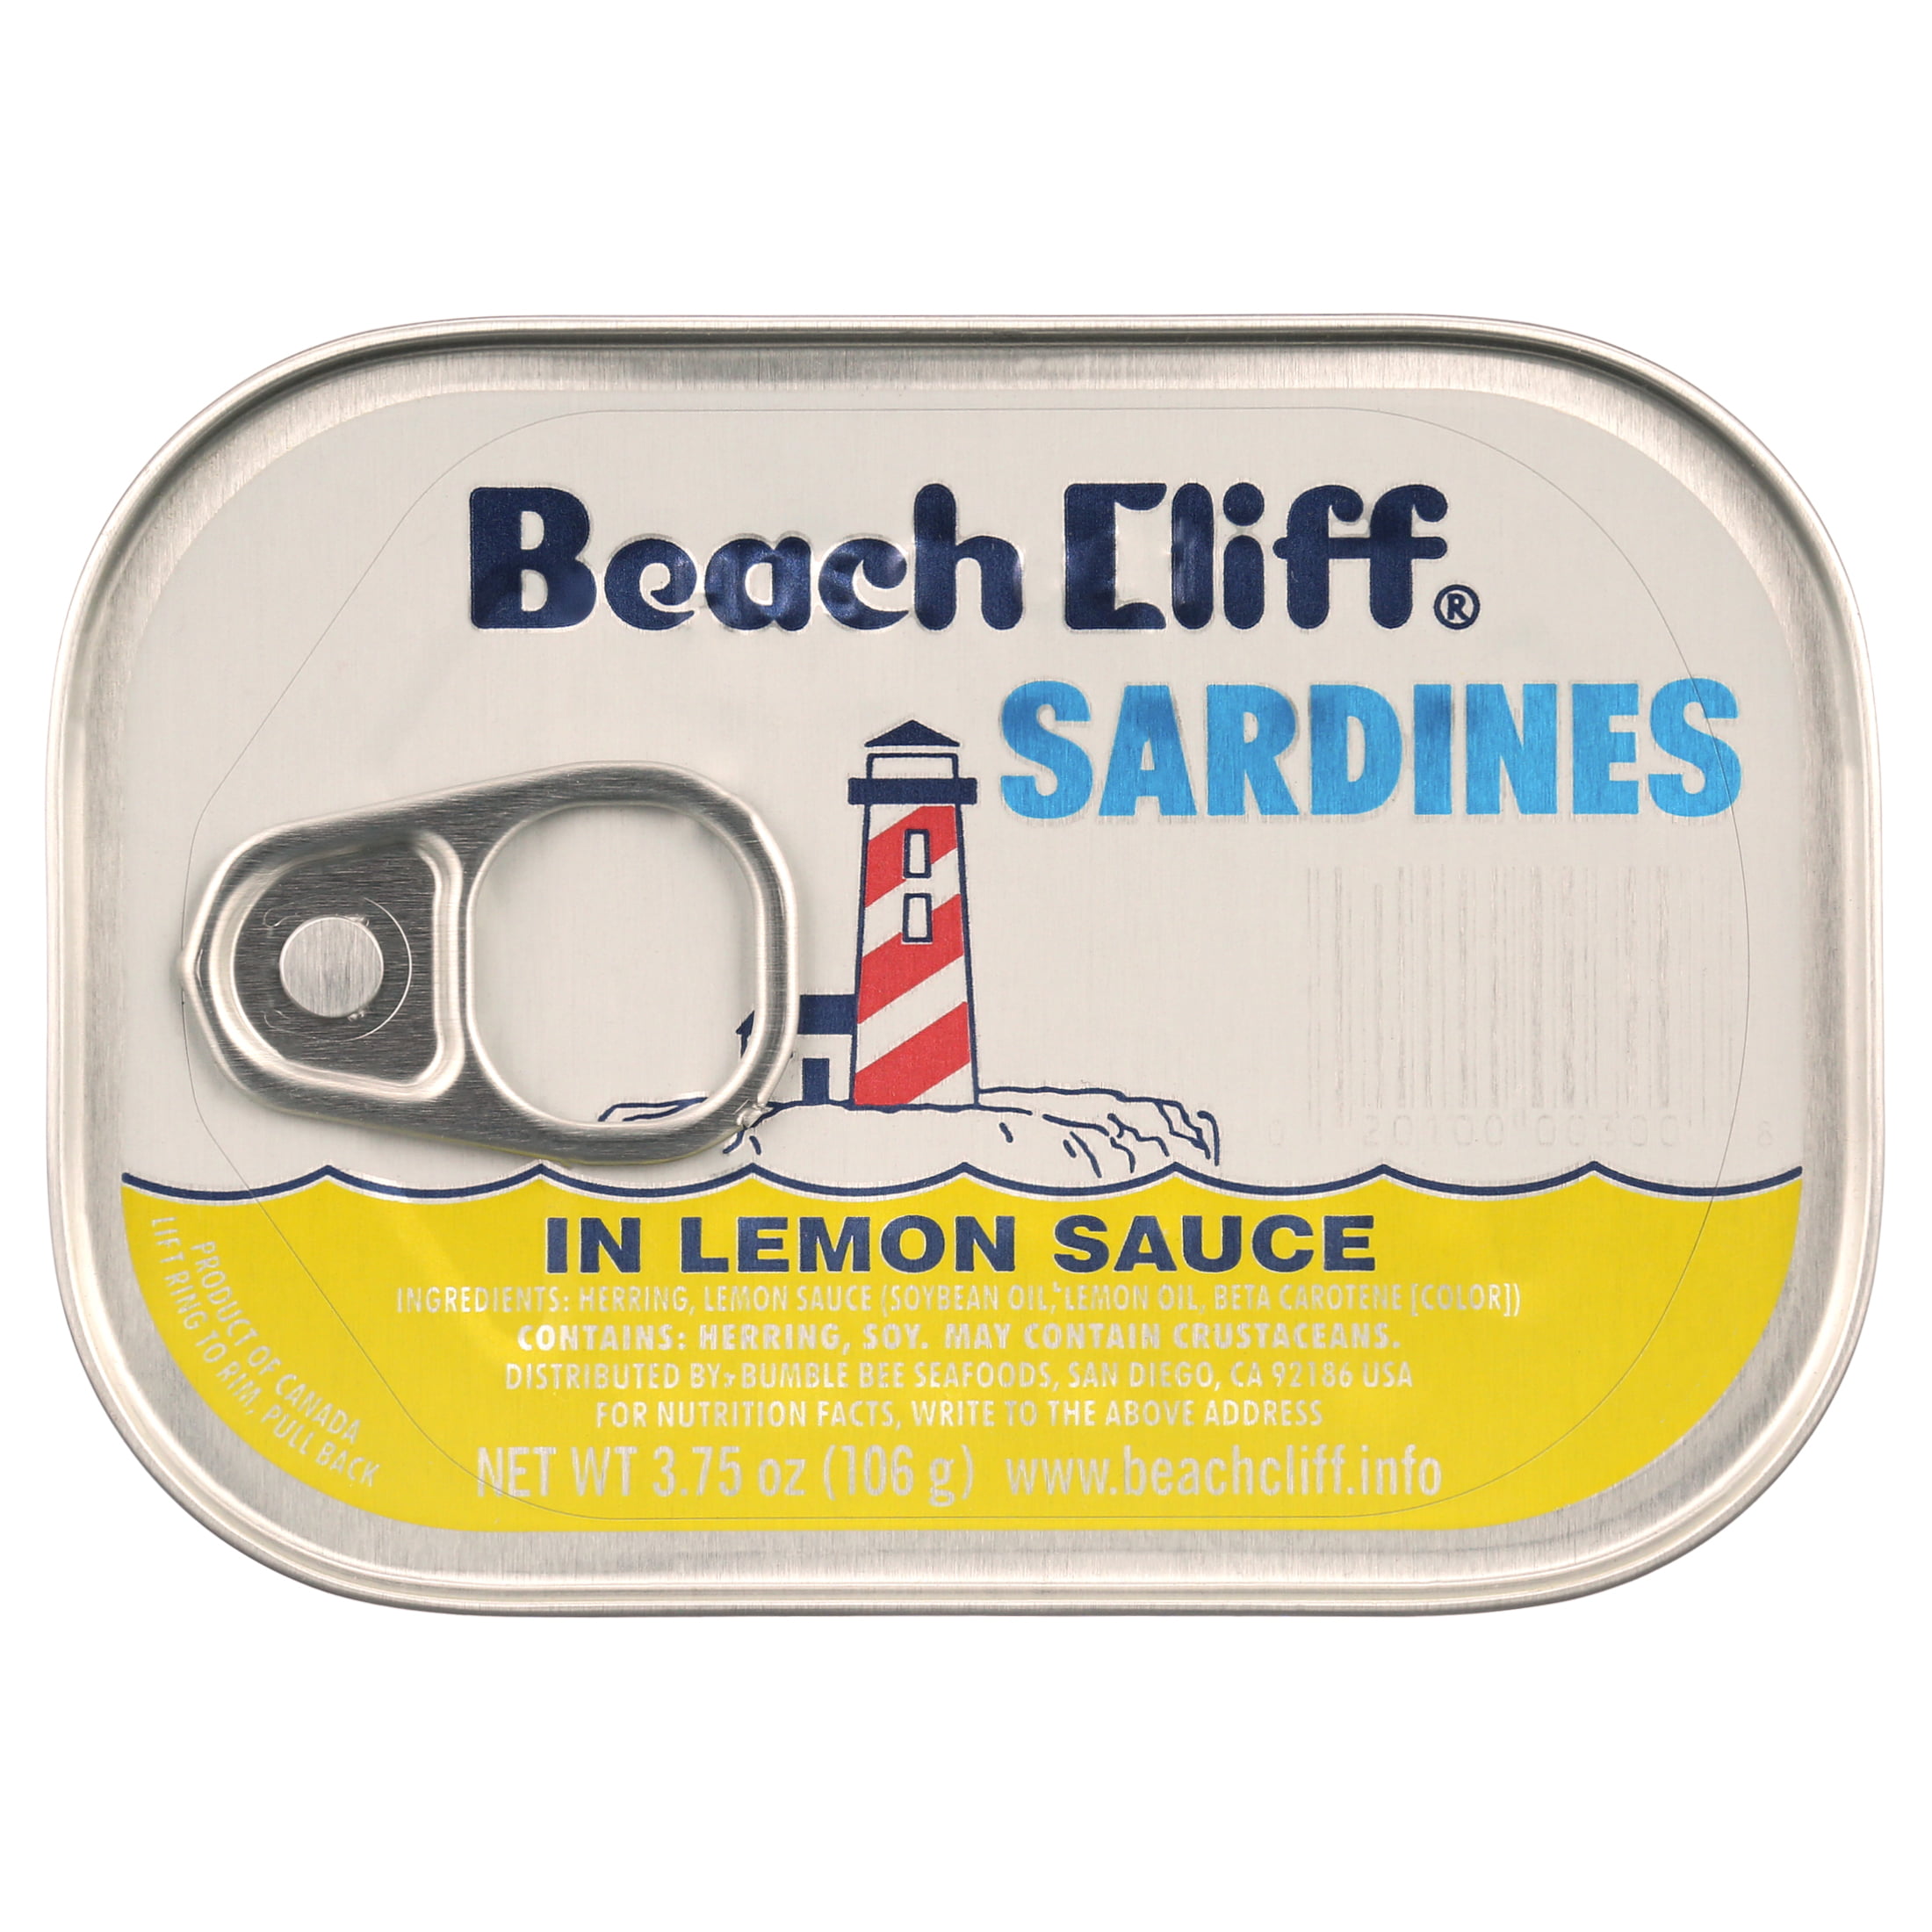 Beach Cliff Wild Caught Sardines in Louisiana Hot Sauce, 3.75 oz Can (Pack of 12) - 11gProtein per Serving - Gluten Free, Keto Friendly - Great for